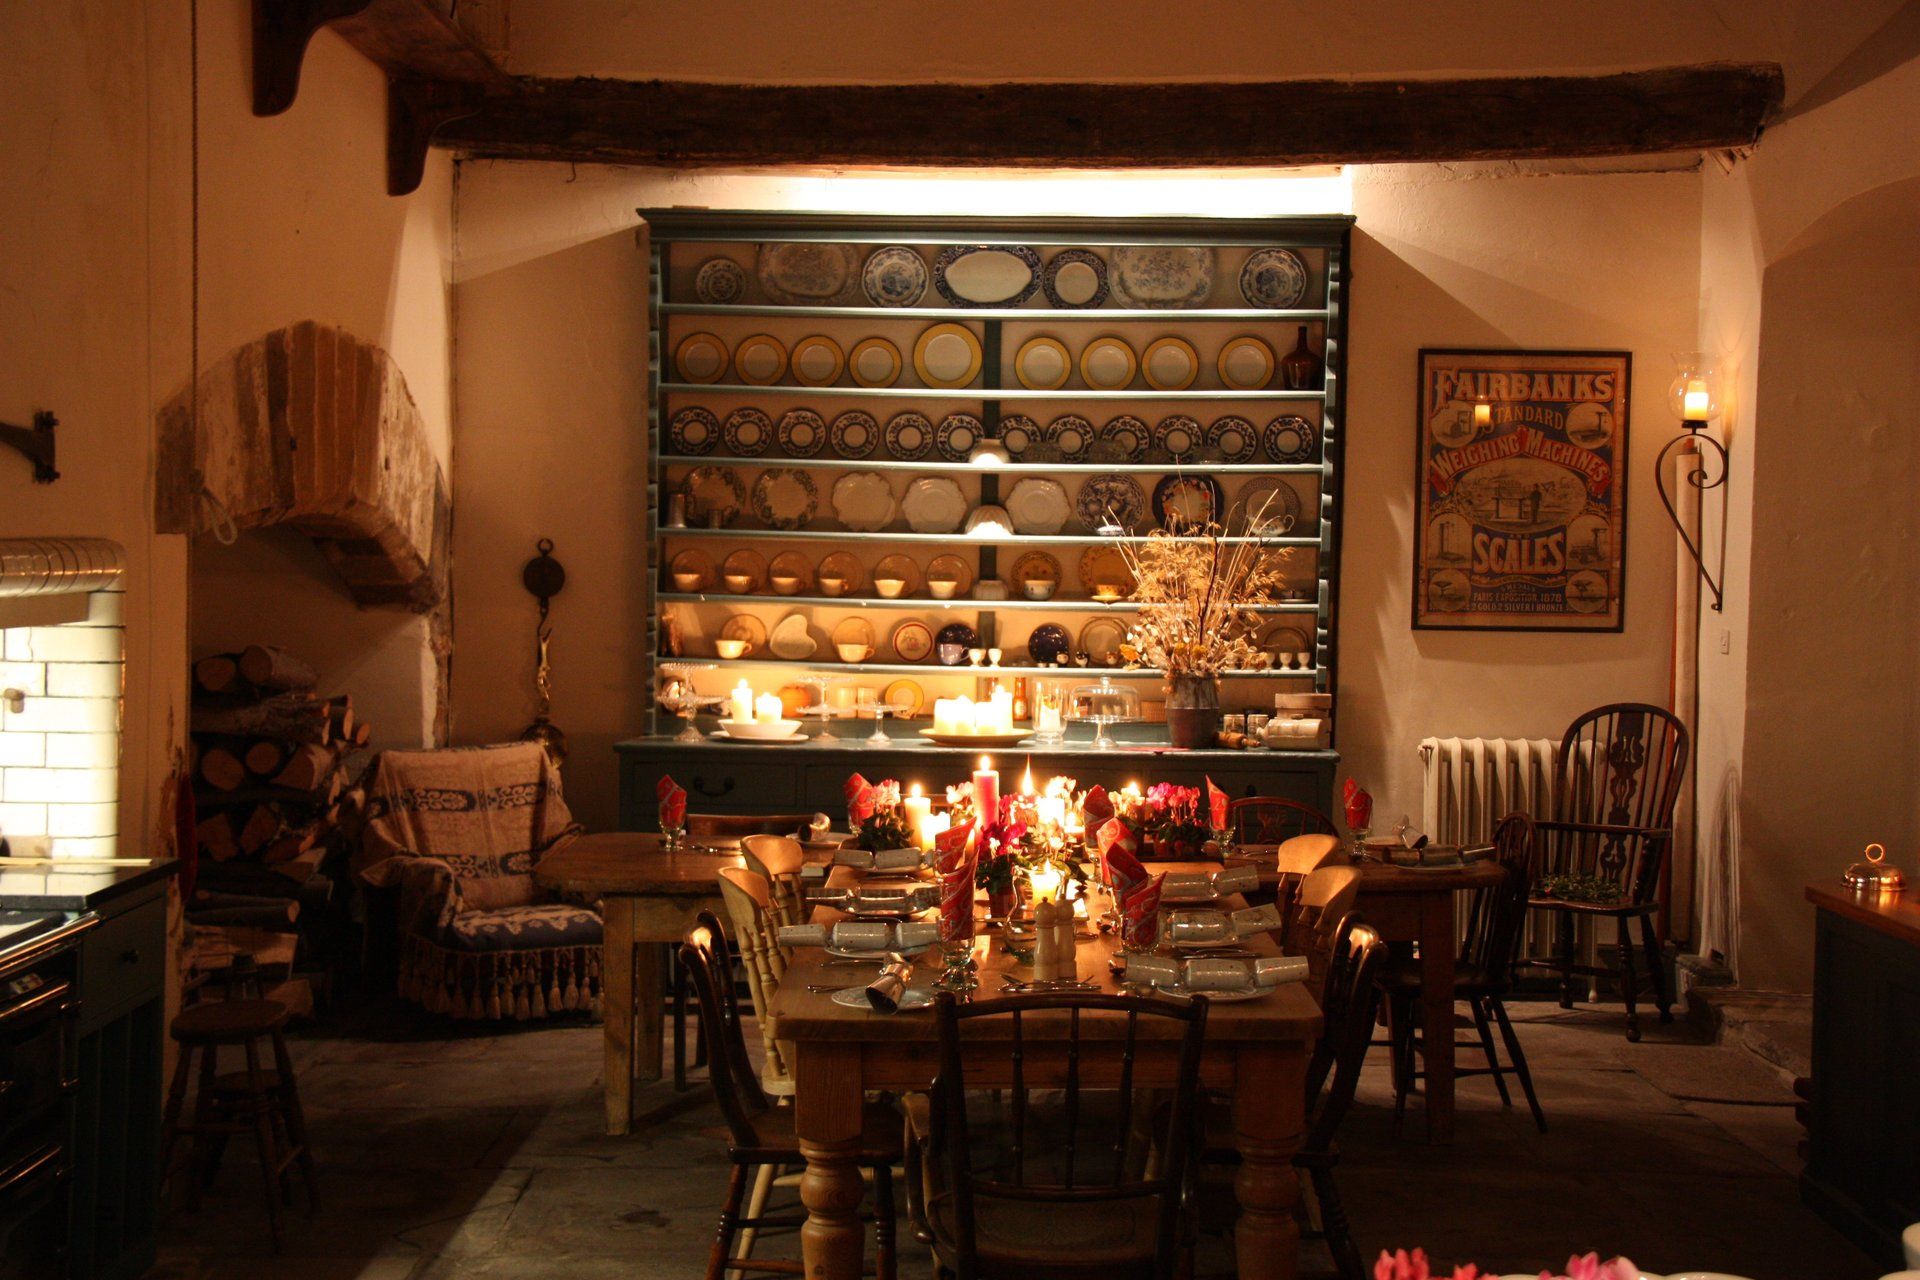 Dinner parties in the Old Kitchen